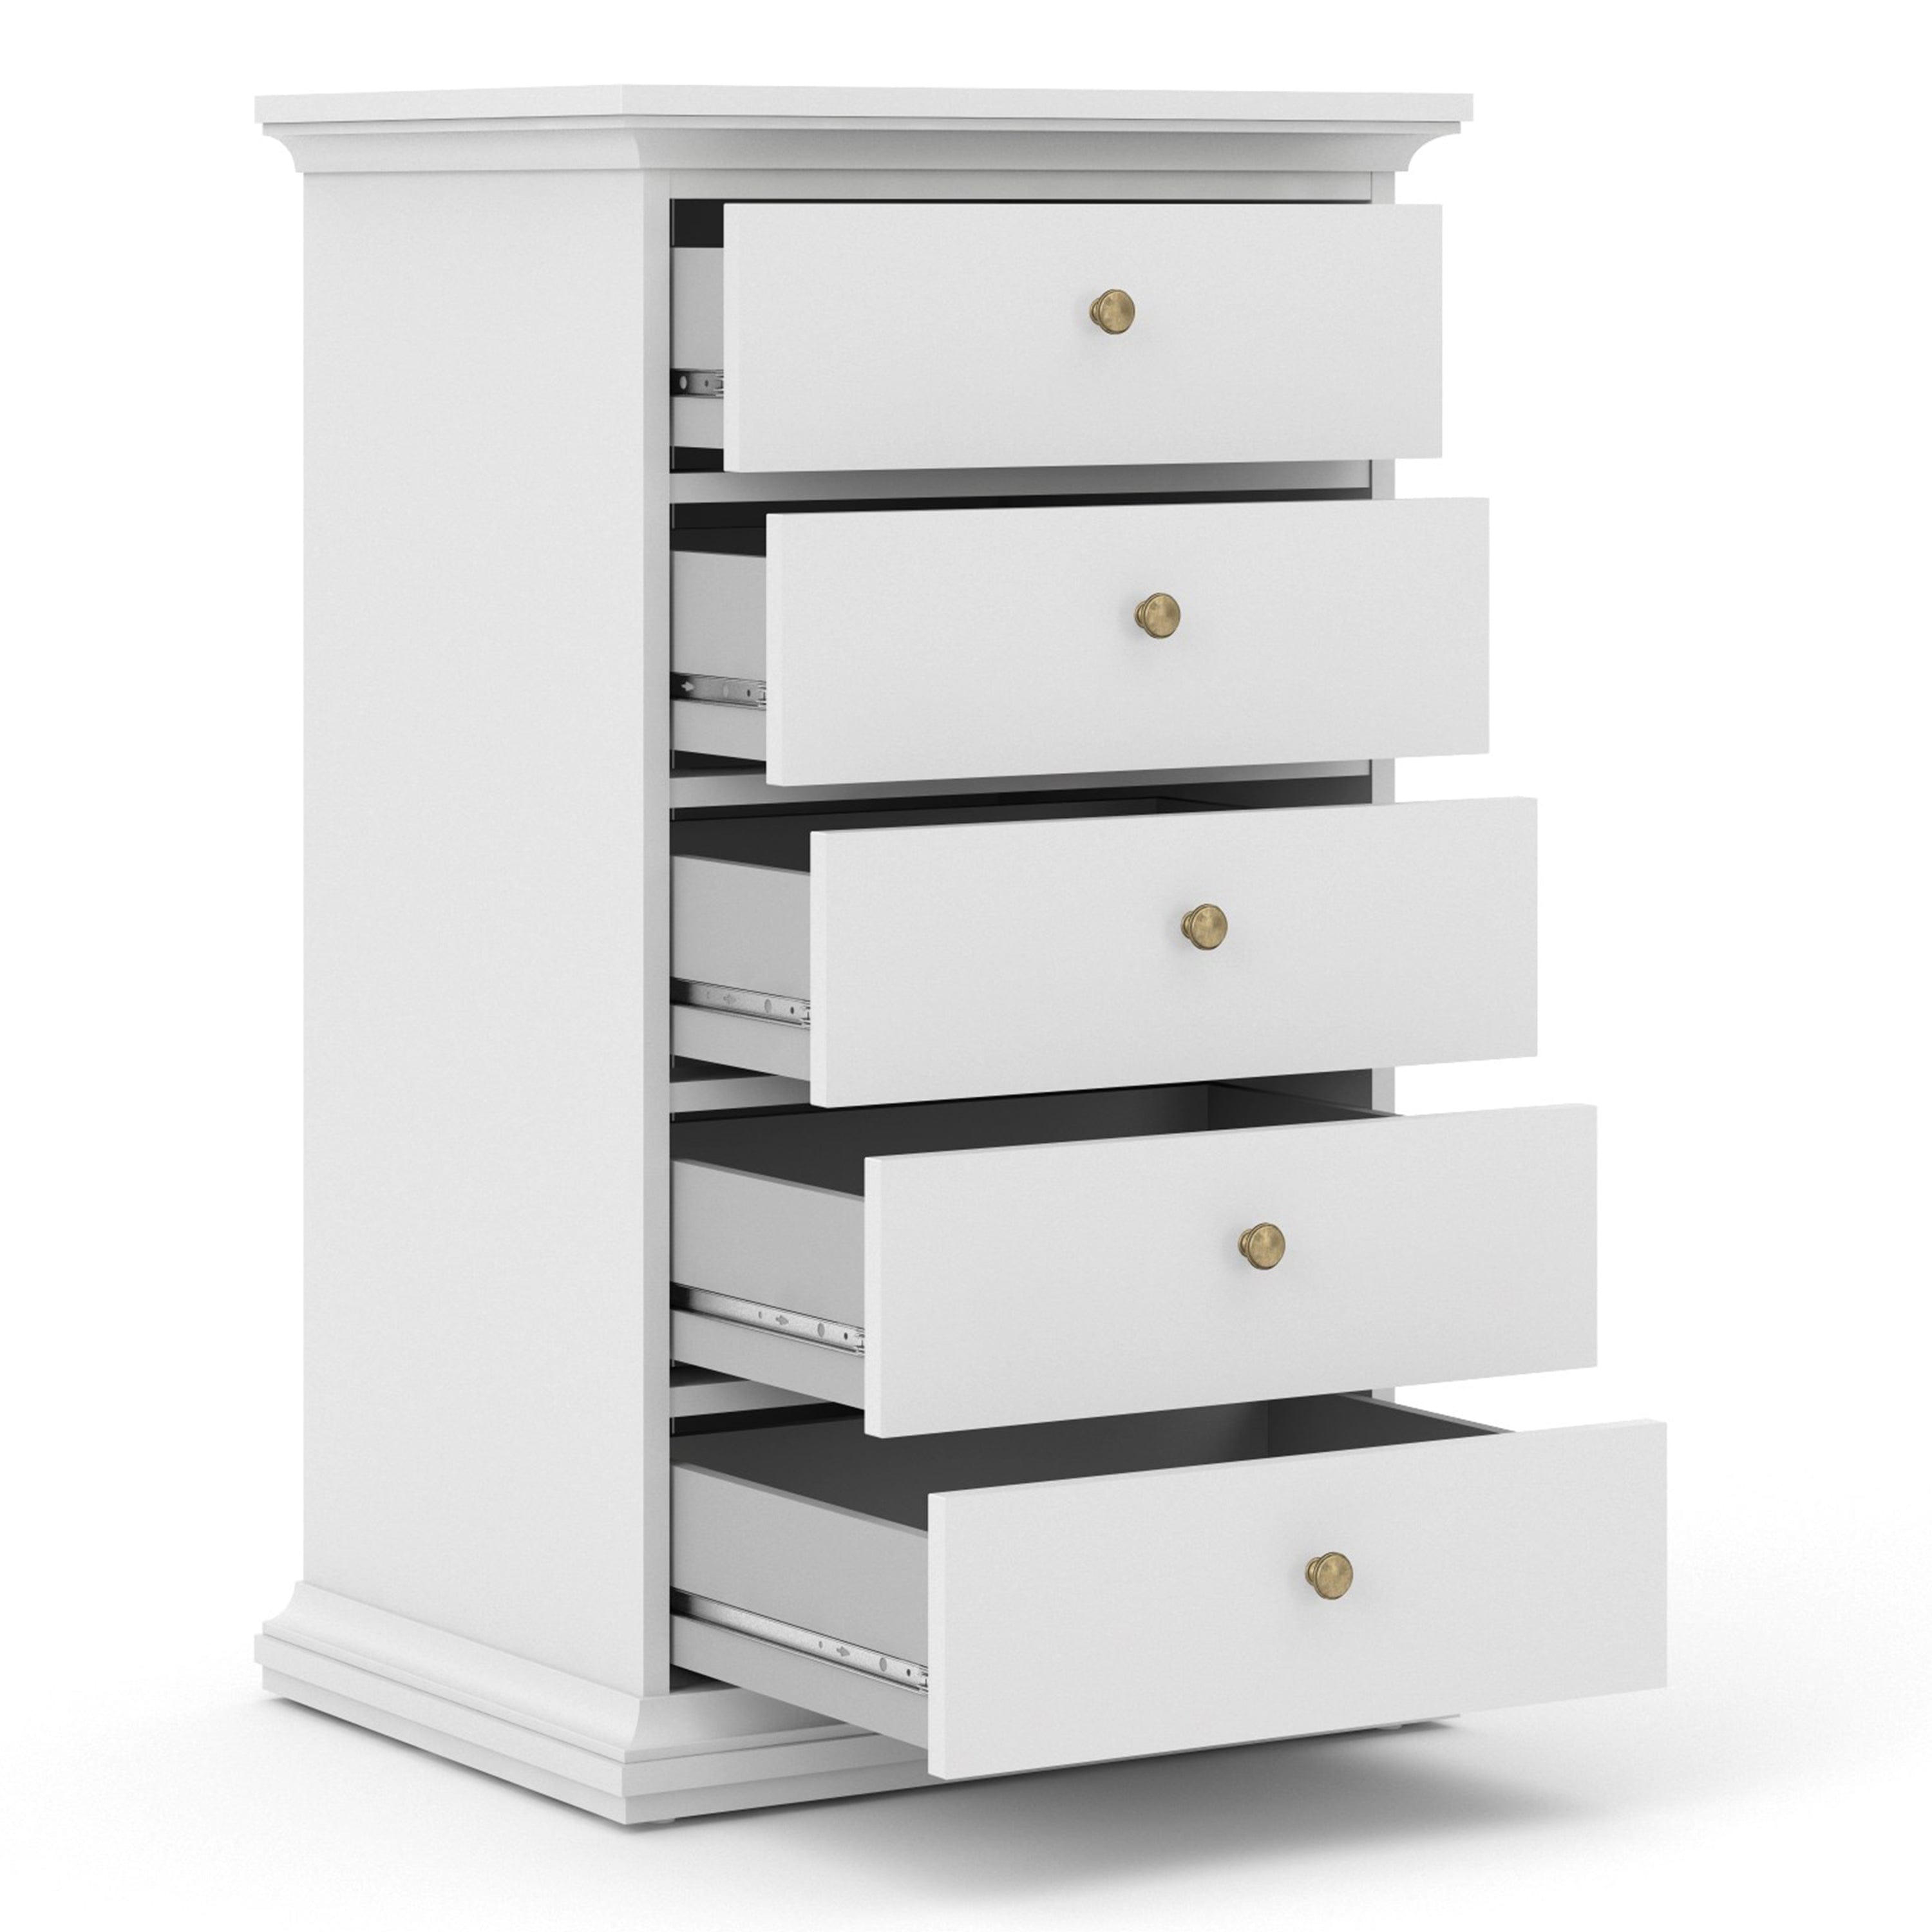 FTG Chest Of Drawers Paris Chest of 5 Drawers in White Bed Kings